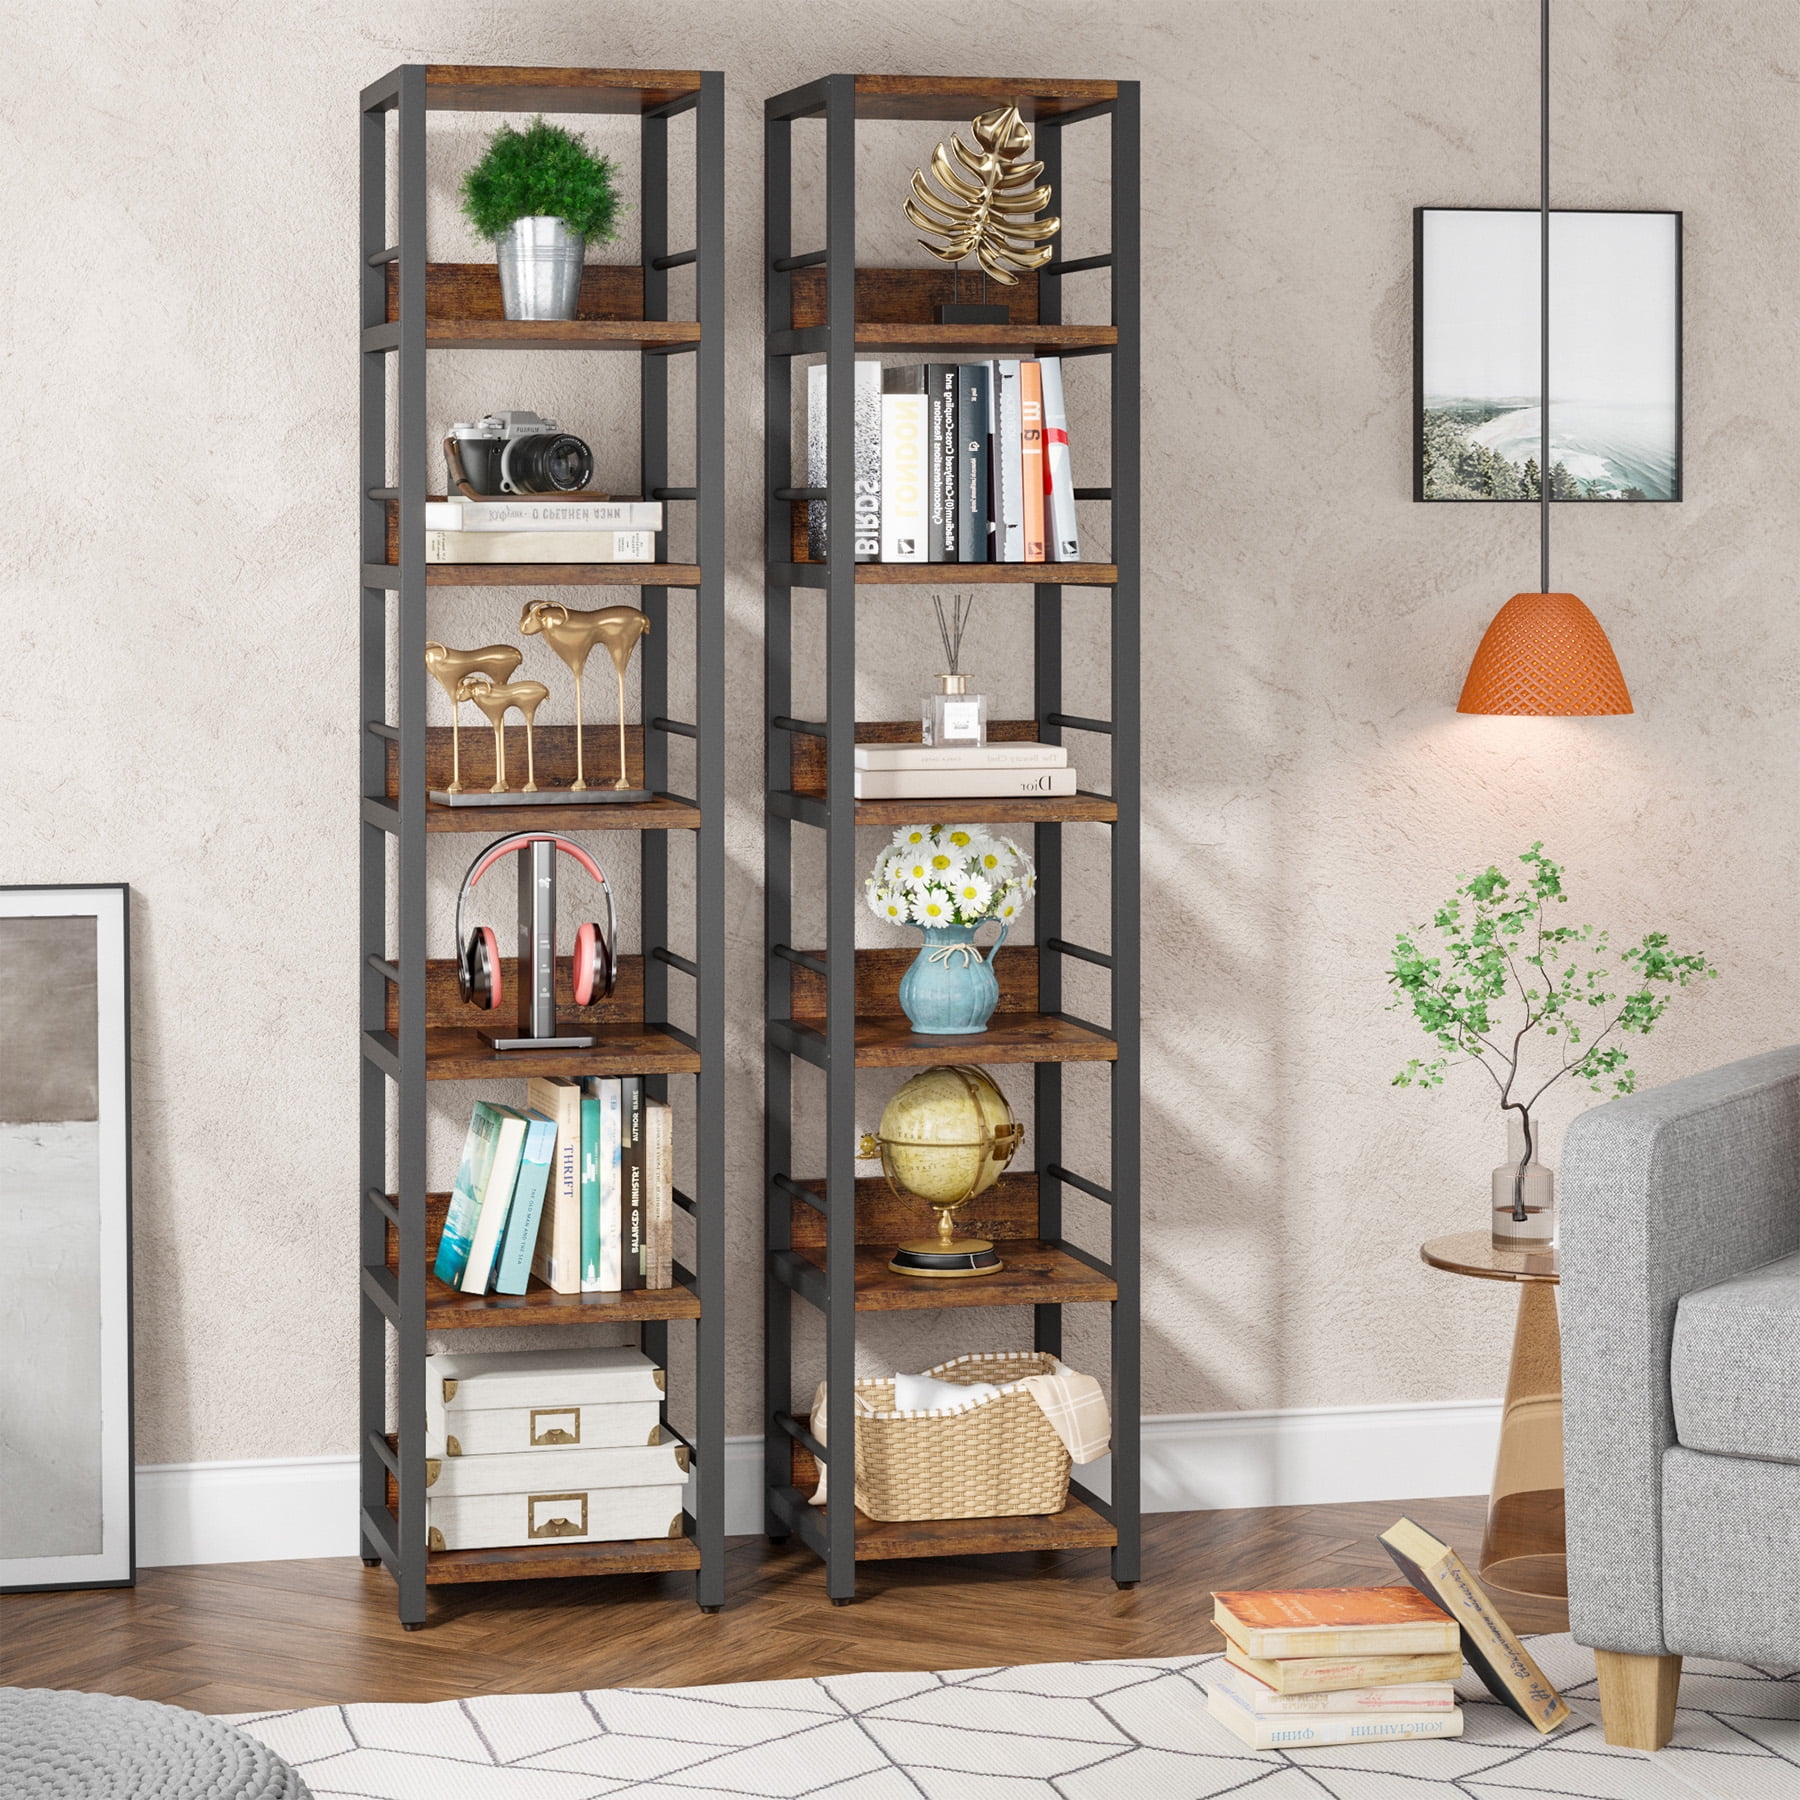 Tribesigns 75” Tall Bookshelf, 11-Shelves Staggered Bookcase with Unique  Arc-Shaped Design, Industrial Etagere Shelving Unit Storage Display Shelves